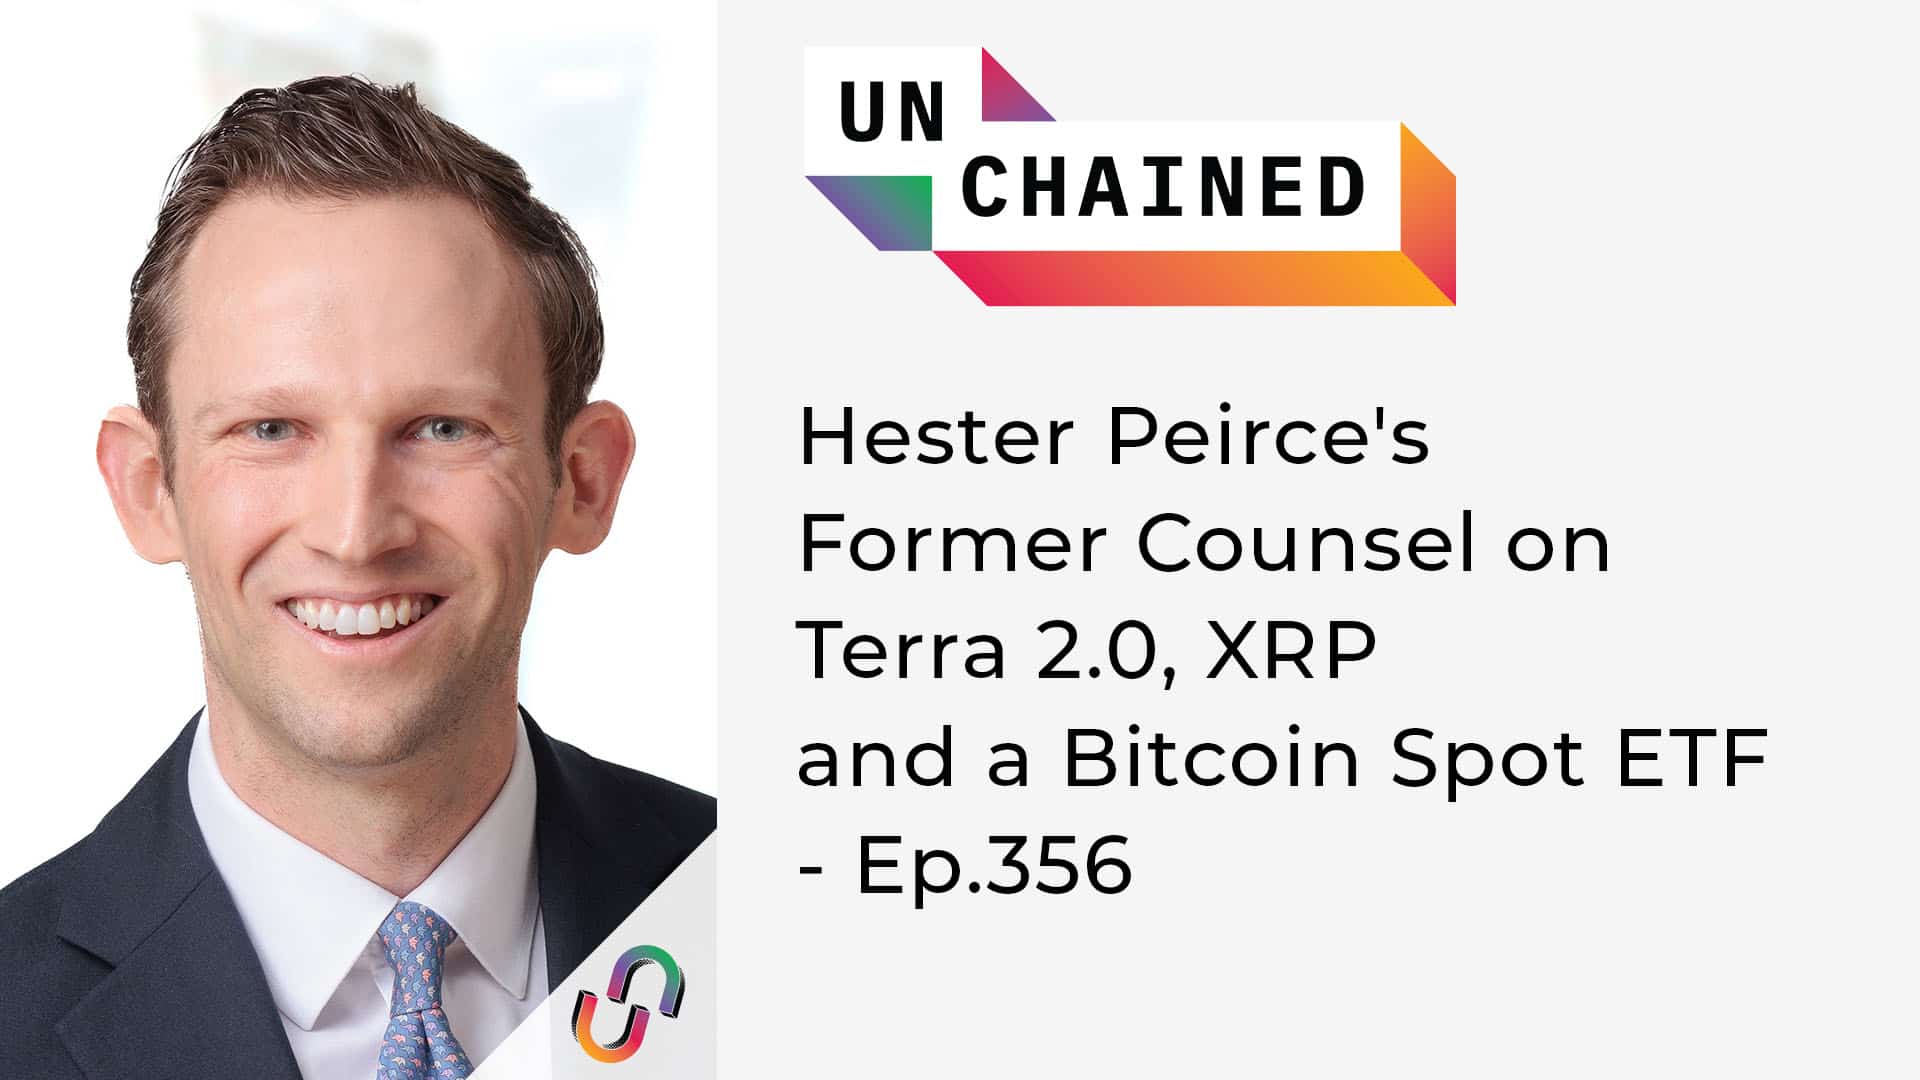 Unchained - Ep.356 - Hester Peirce's Former Counsel on Terra 2.0, XRP and a Bitcoin Spot ETF